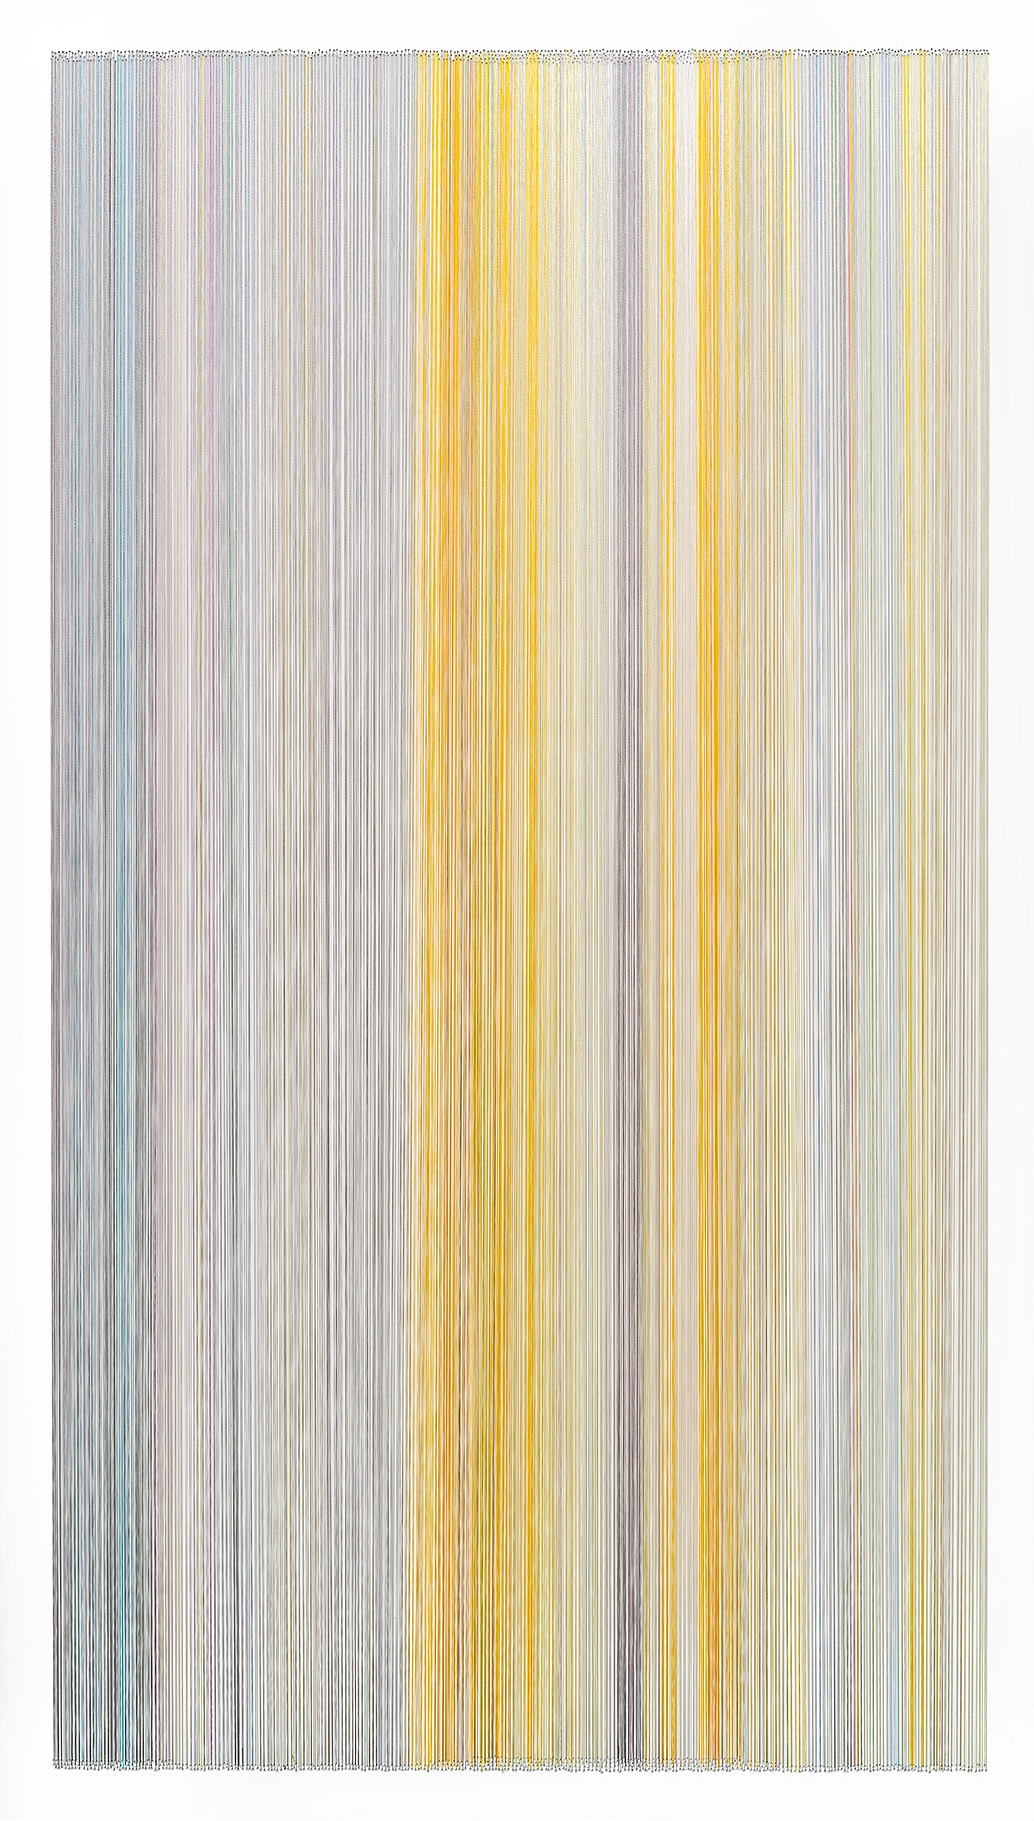    thread drawing 31   2014 rayon thread 42 x 24 inches Collection Stinson Law Firm, Kansas City, Missouri 